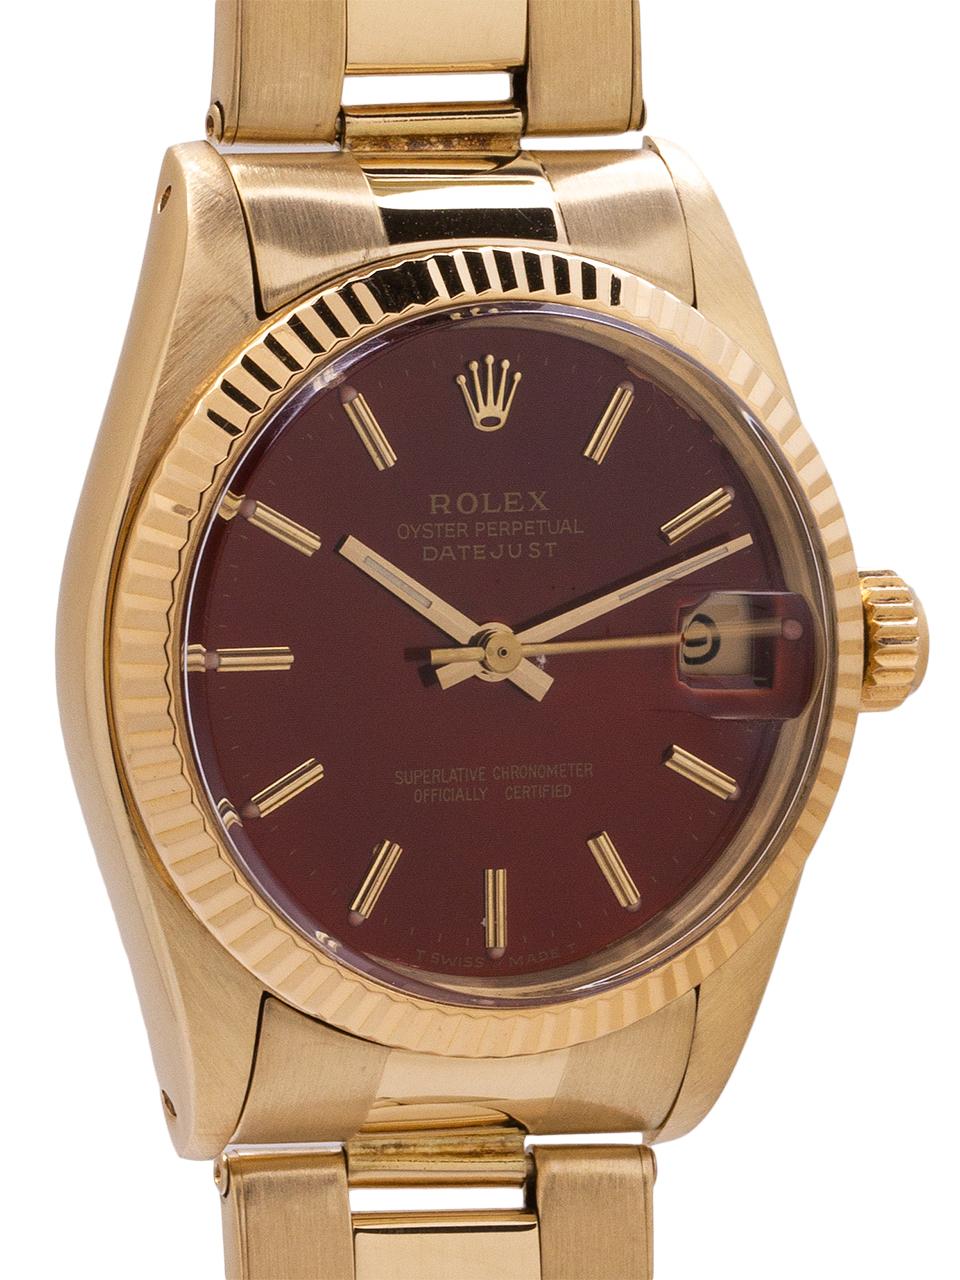 
Rolex midsize Datejust 14K YG ref 6827 circa 1982. Featuring 31mm diameter case with smooth bezel, acrylic crystal and custom colored “Rootbeer” color dial with applied gold indexes and gold baton hands. Powered by self winding movement with sweep